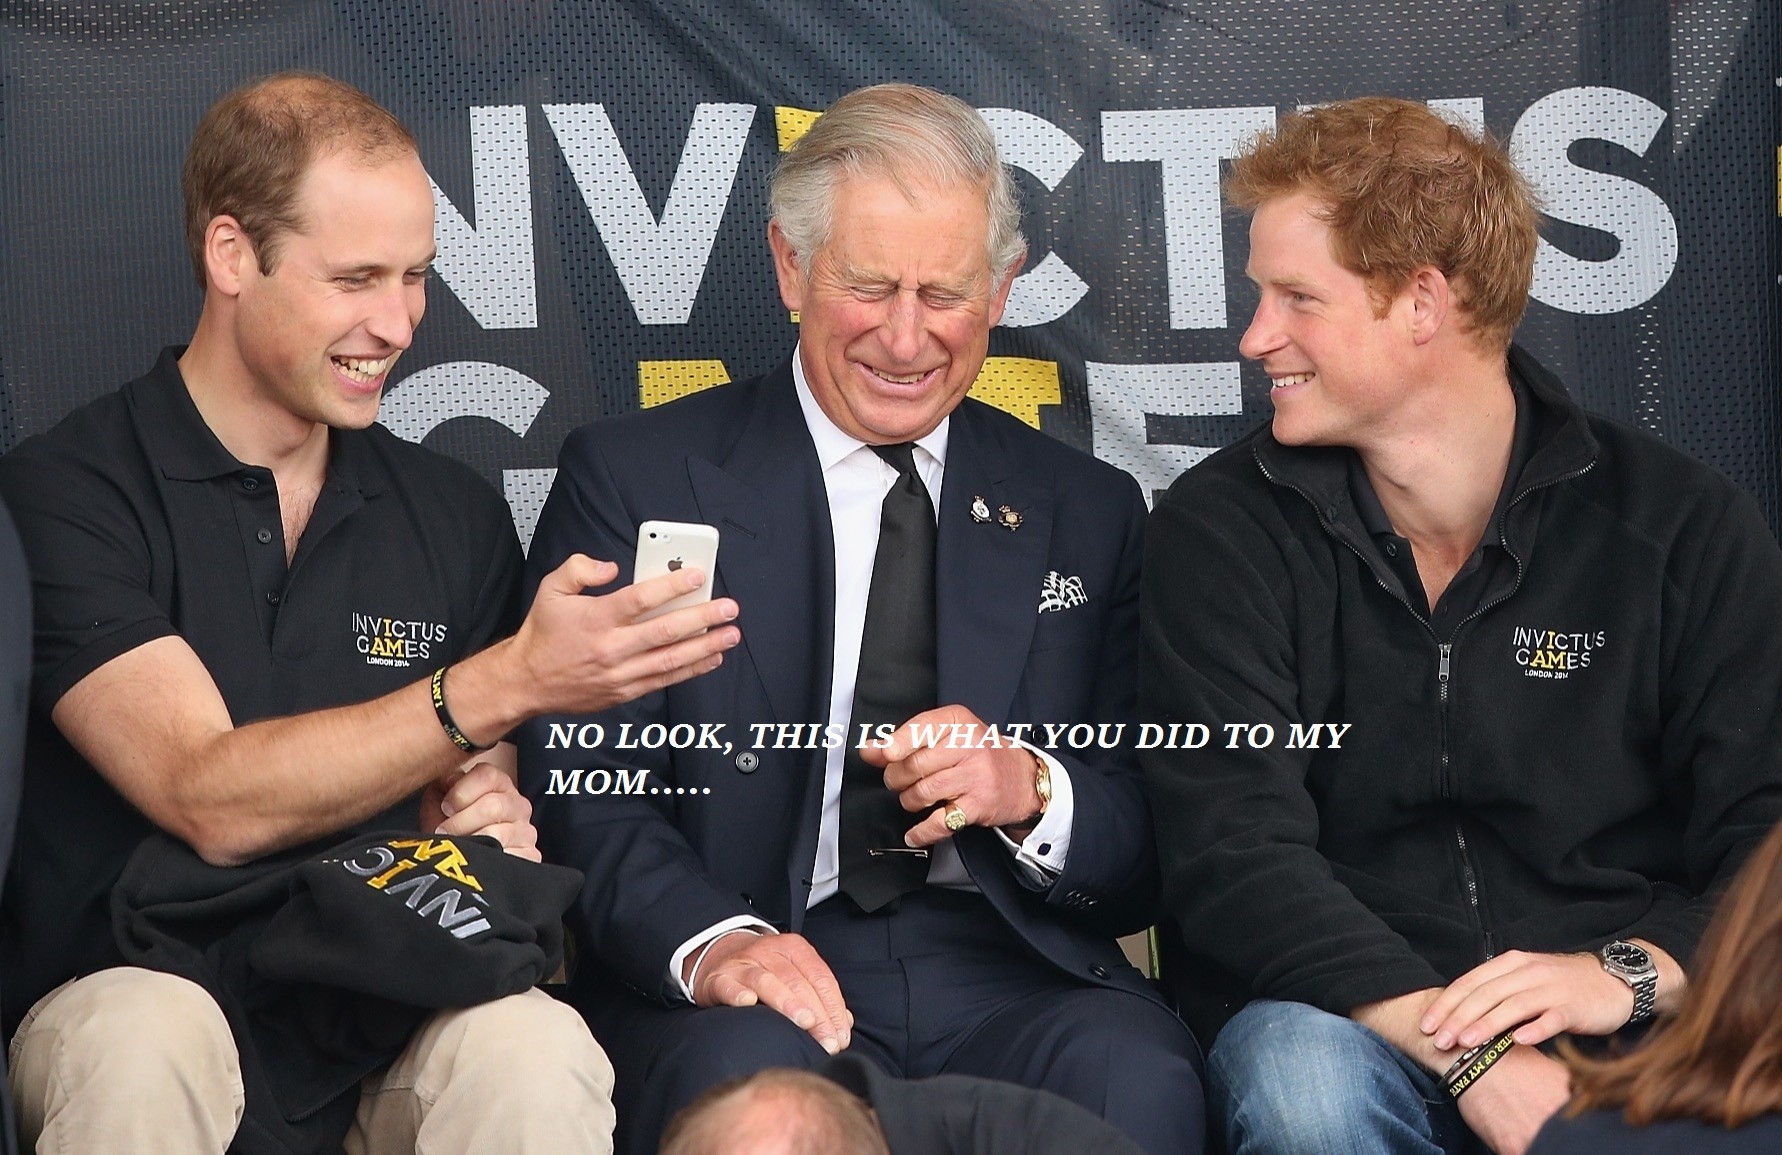 prince charles and prince harry - Vvt S Wictus No Look, This Is What You Did To My Mom.....